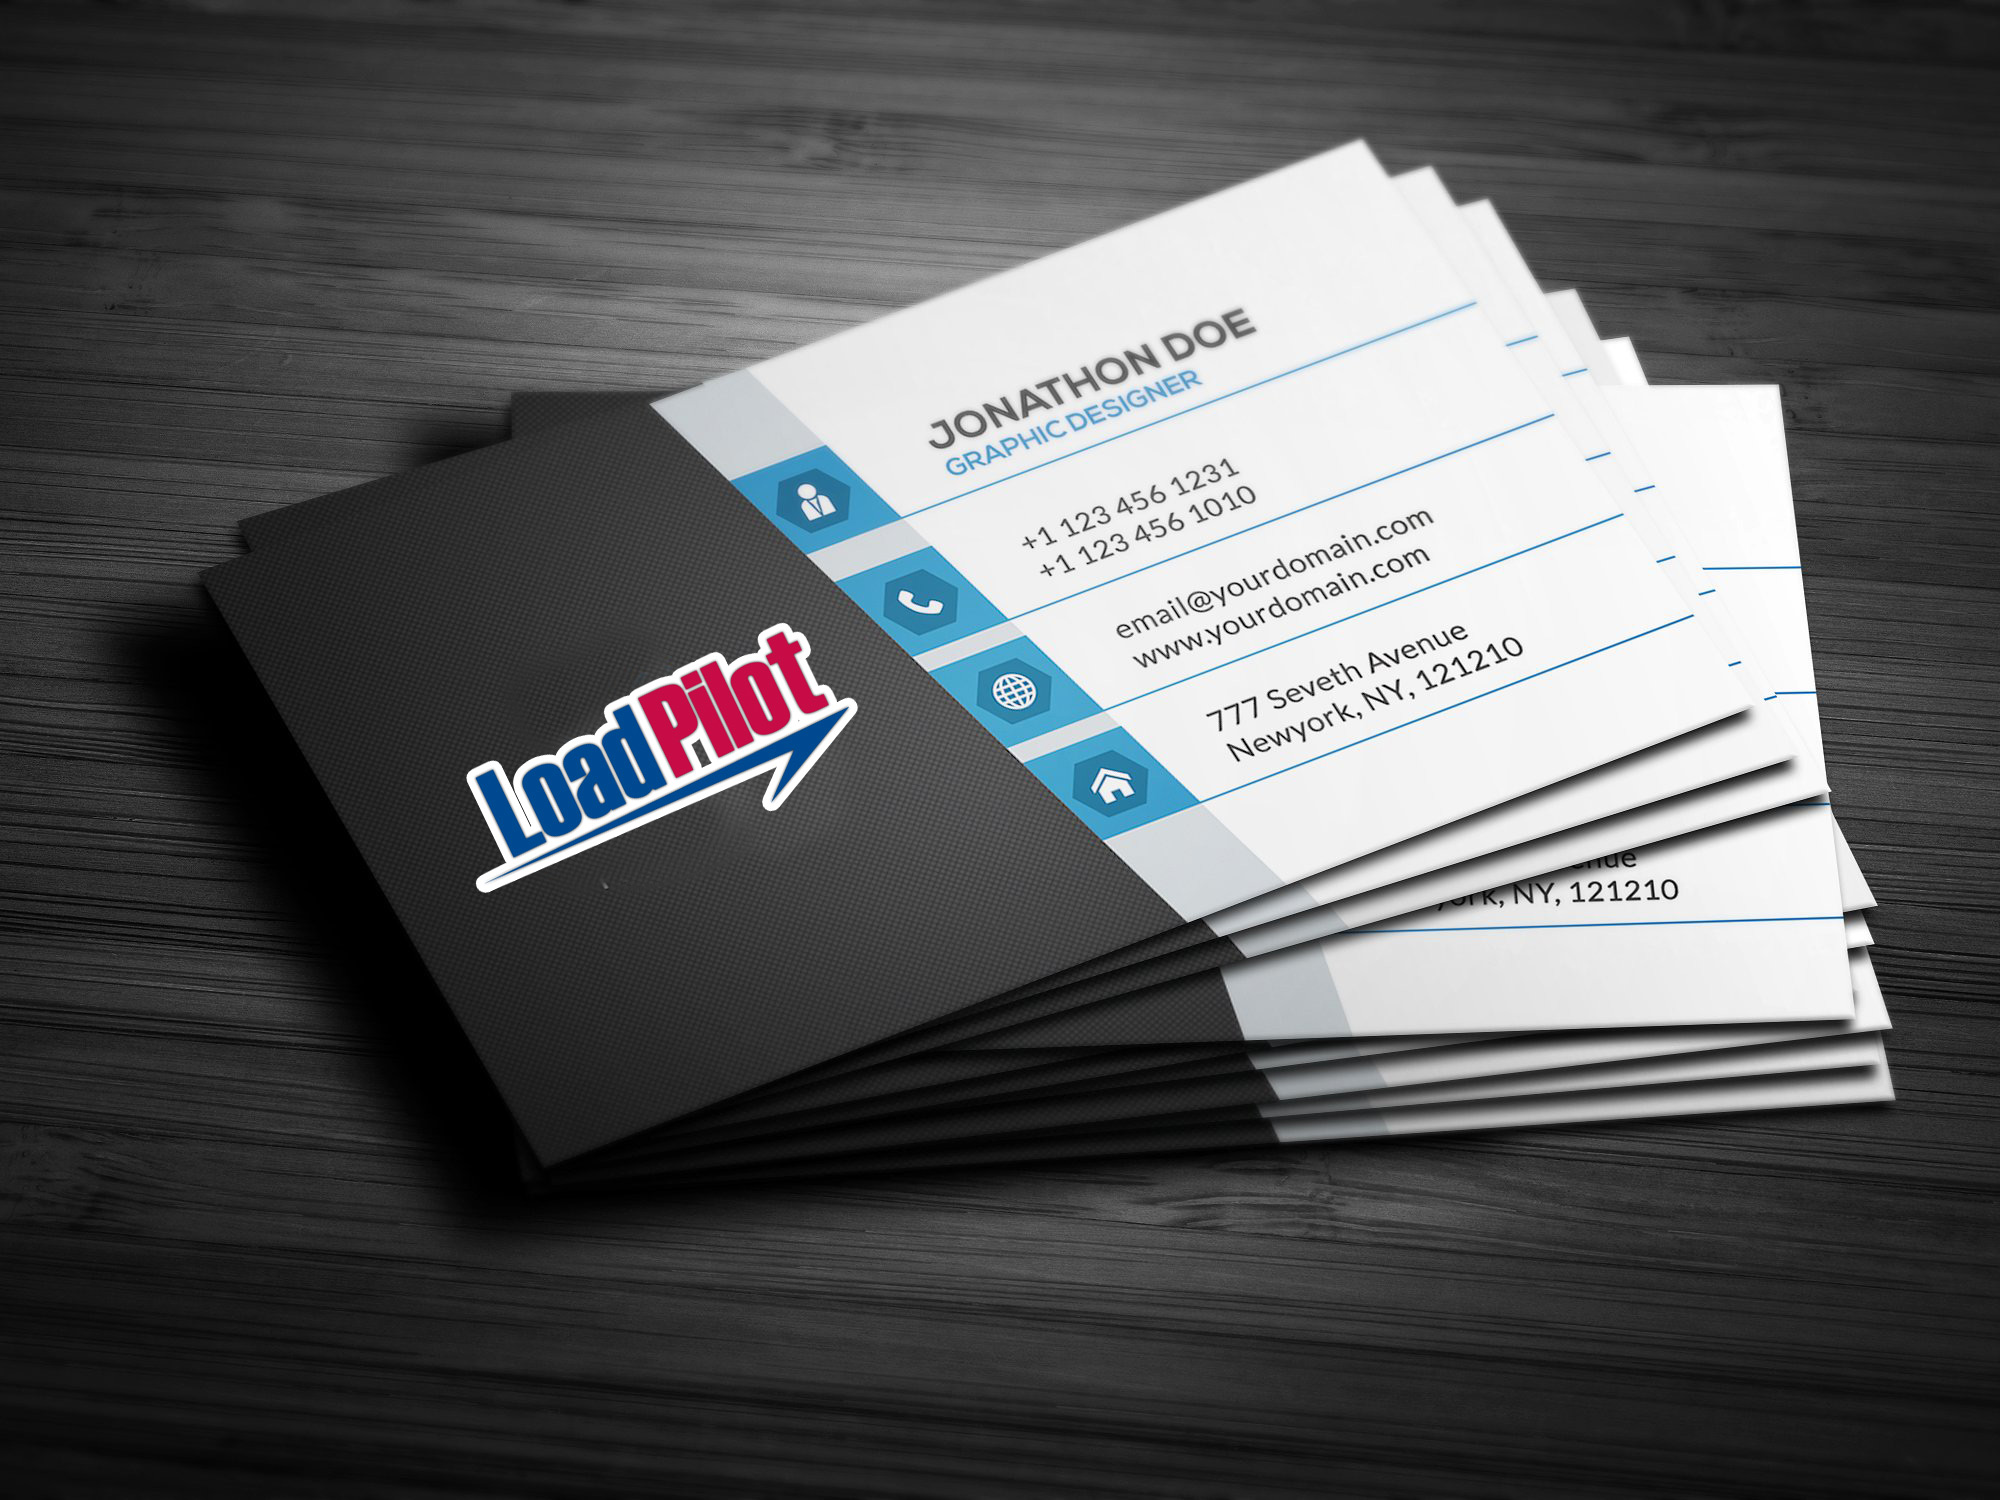 company message ideas for business cards 1